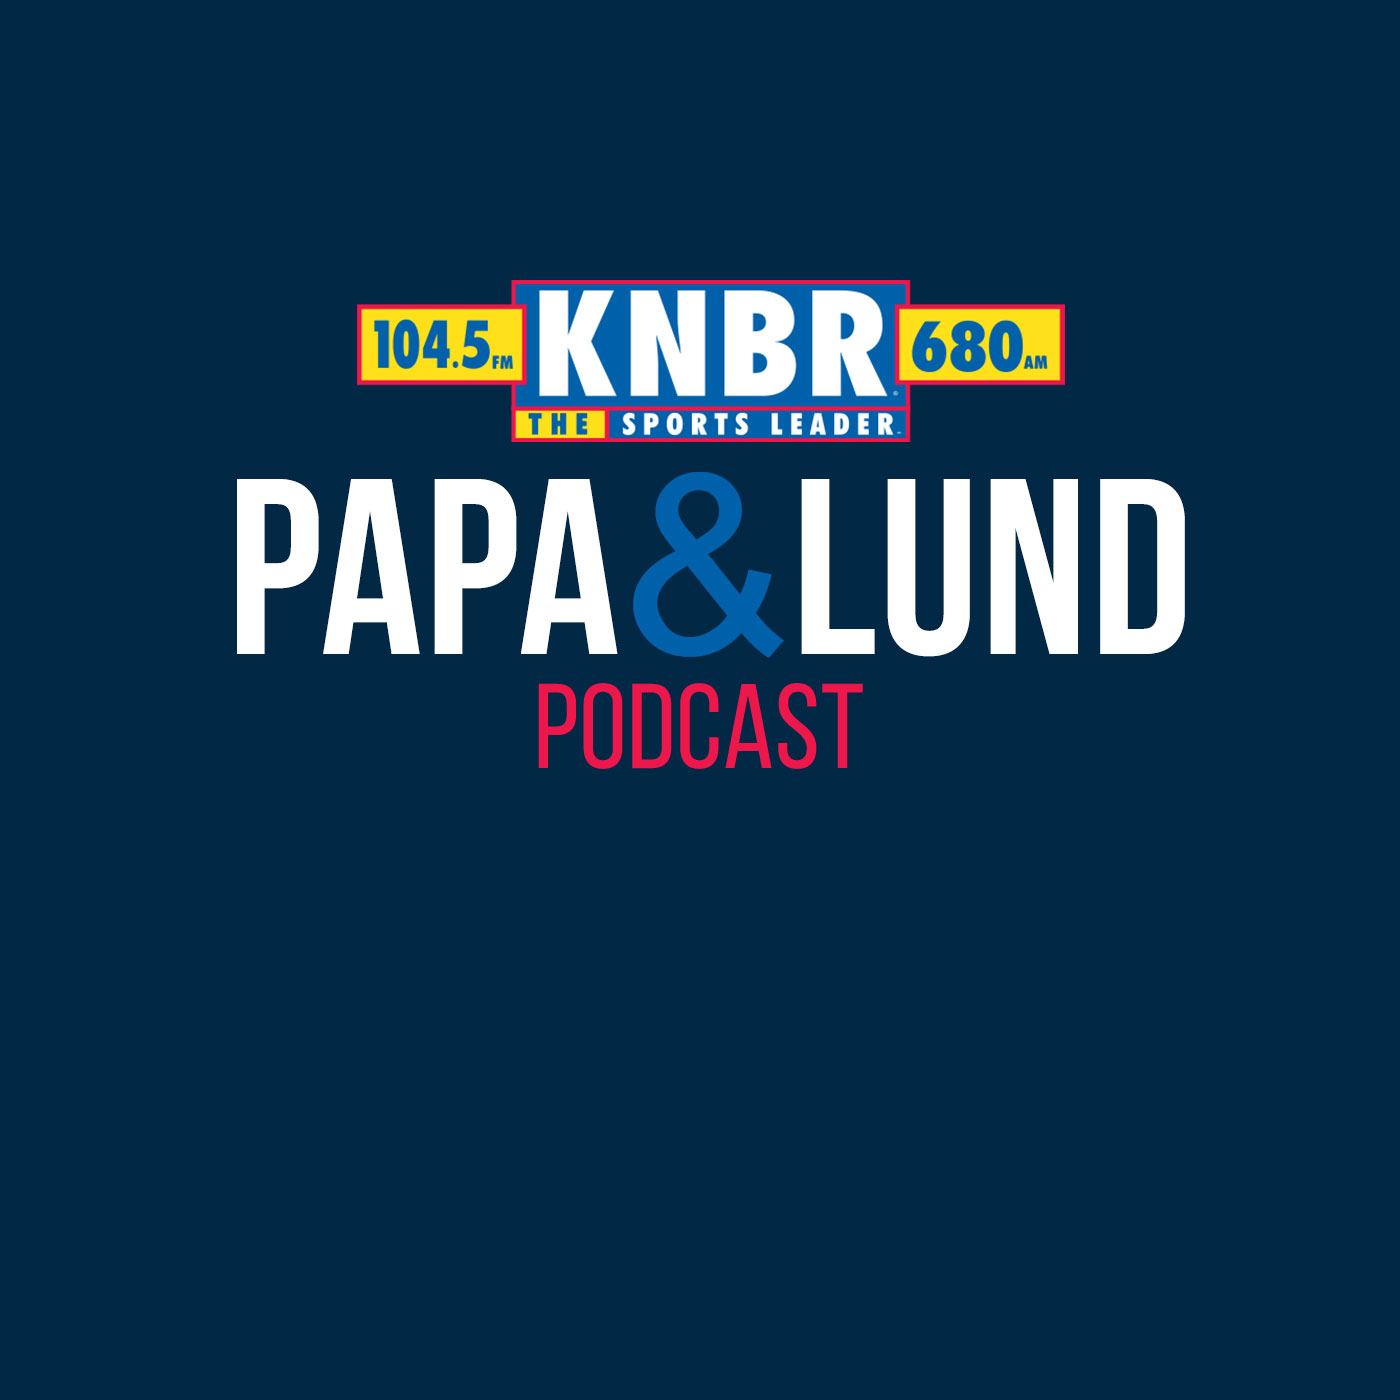 2-6 Reuben Frank joins Papa & Lund to break down the Andy Reid Bowl between the Eagles and Chiefs and says where the Eagles need to dominate in order to win the Superbowl